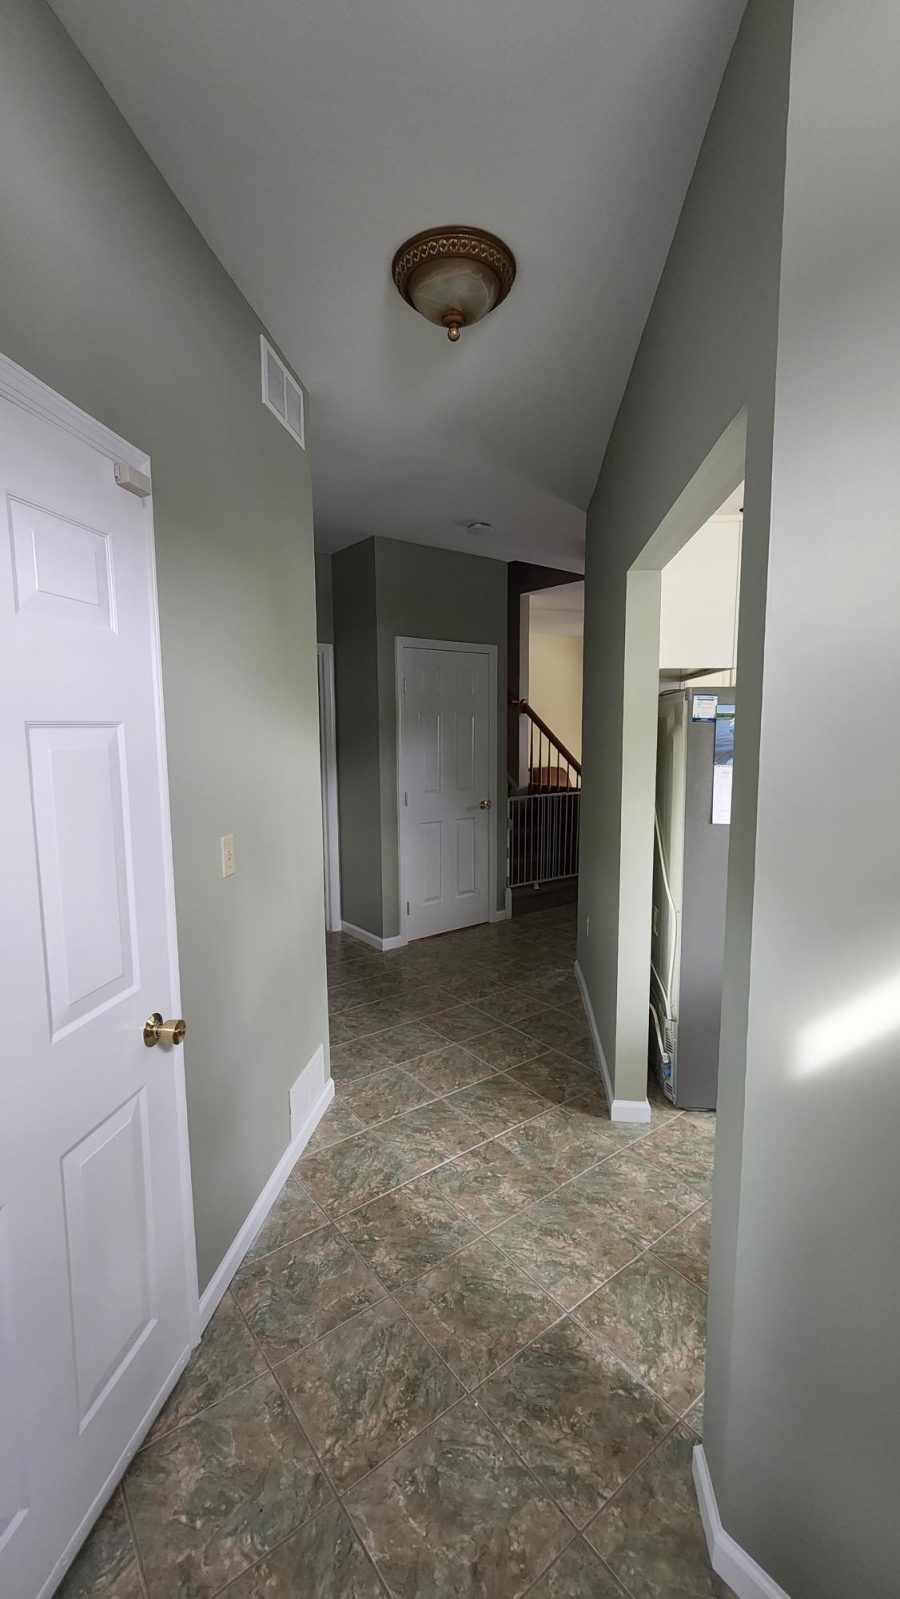 Hallway in Northampton, PA after completed residential interior painting project by CertaPro Painters of the Greater Lehigh Valley Preview Image 1